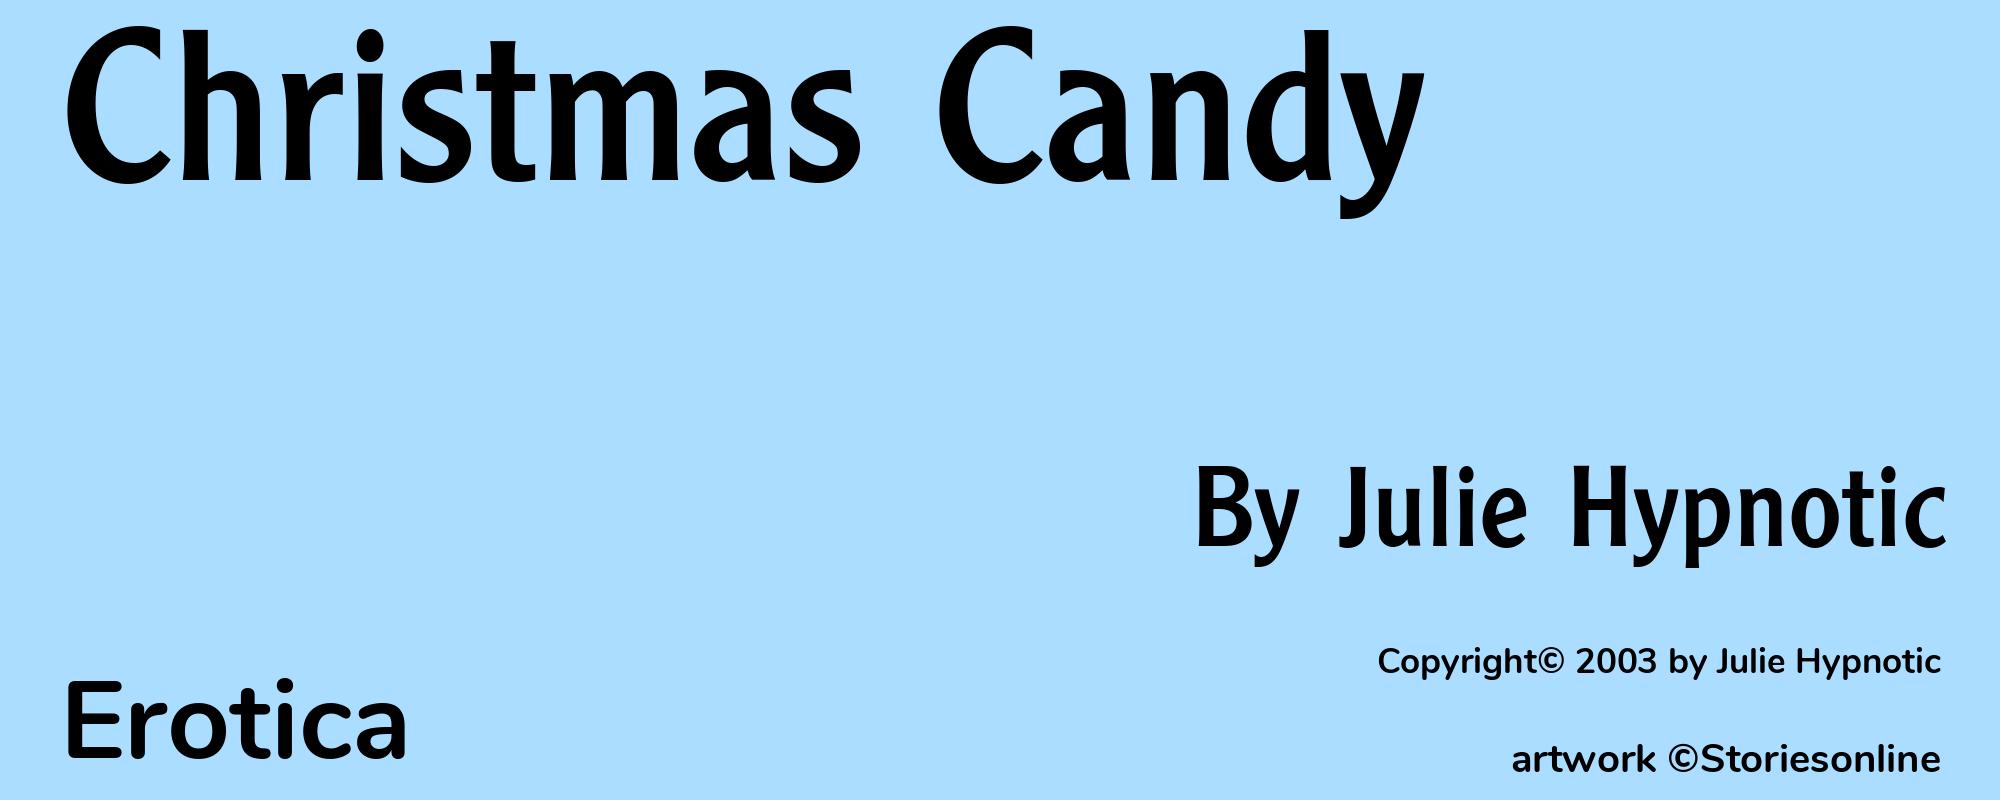 Christmas Candy - Cover